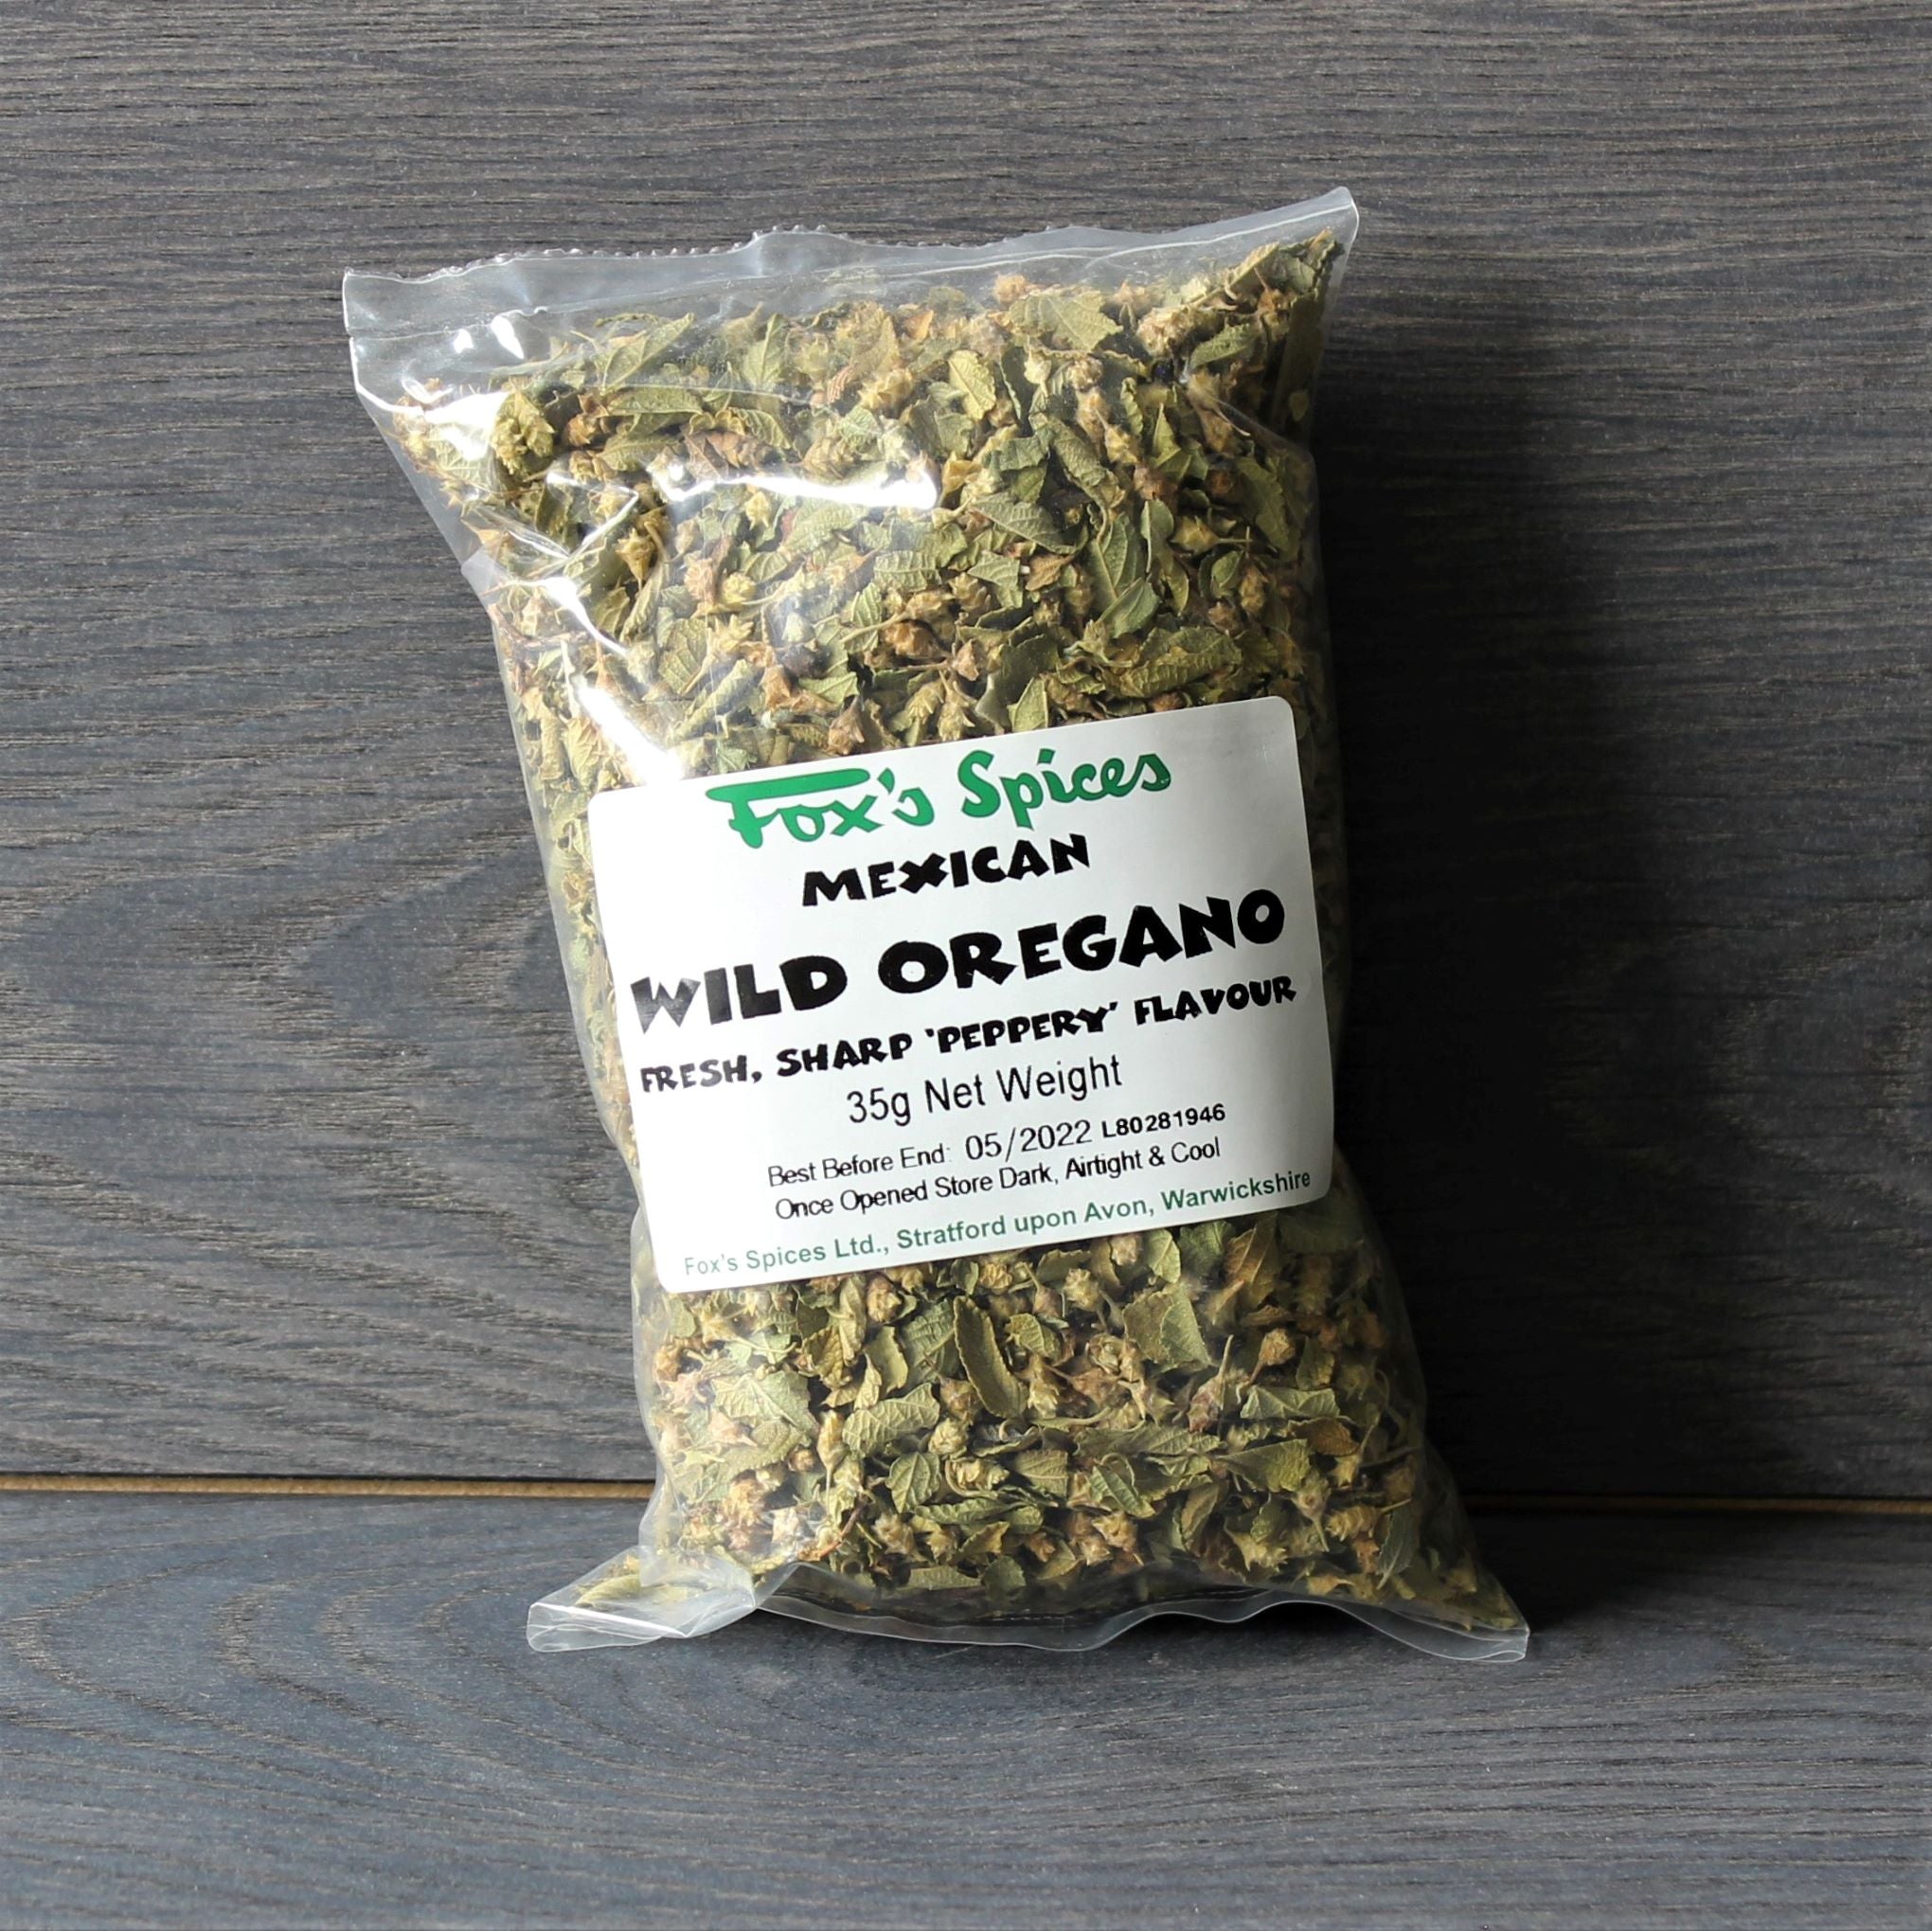 A 35g bag of Mexican Wild Oregano by Fox's Spices